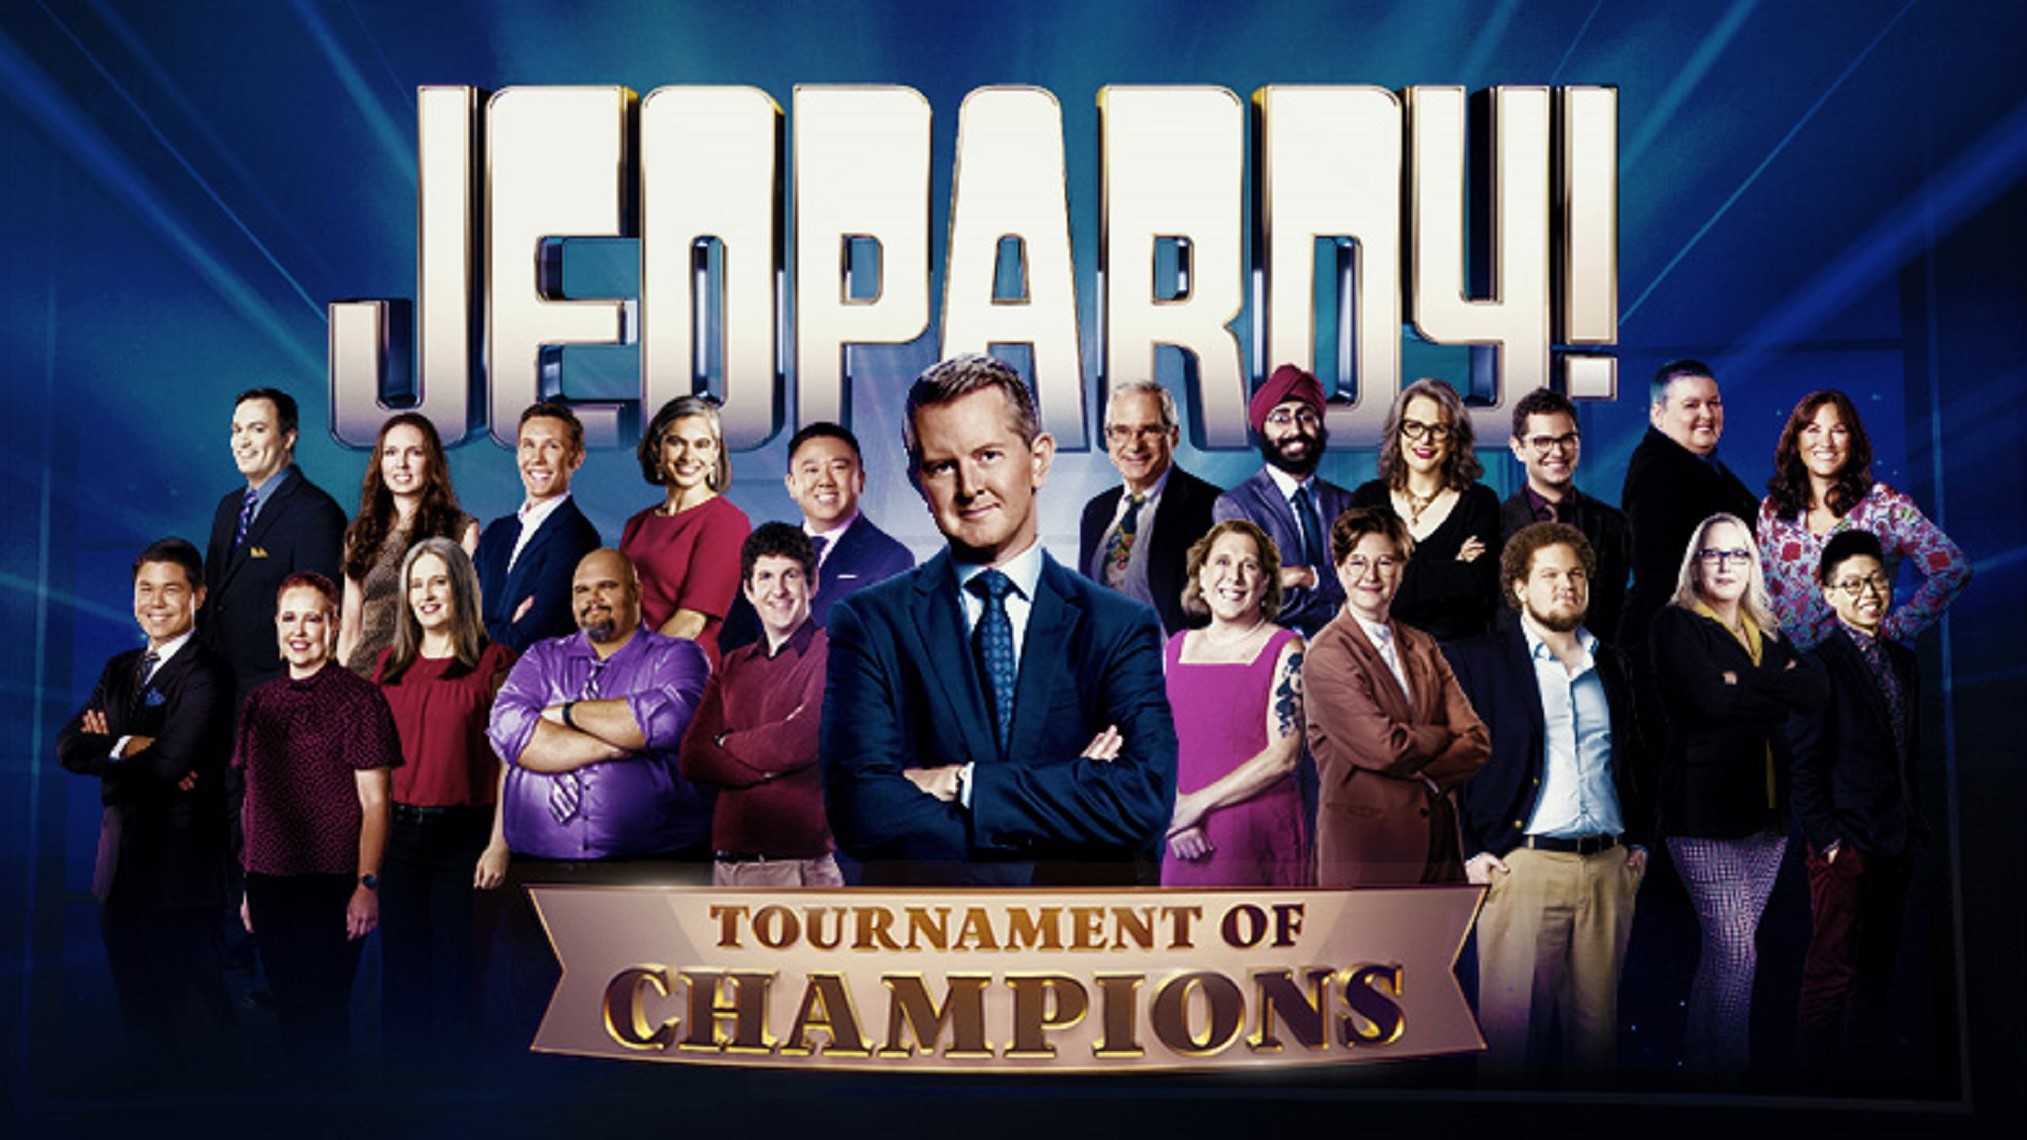 'Jeopardy!' Your Ultimate Guide to the Tournament of Champions